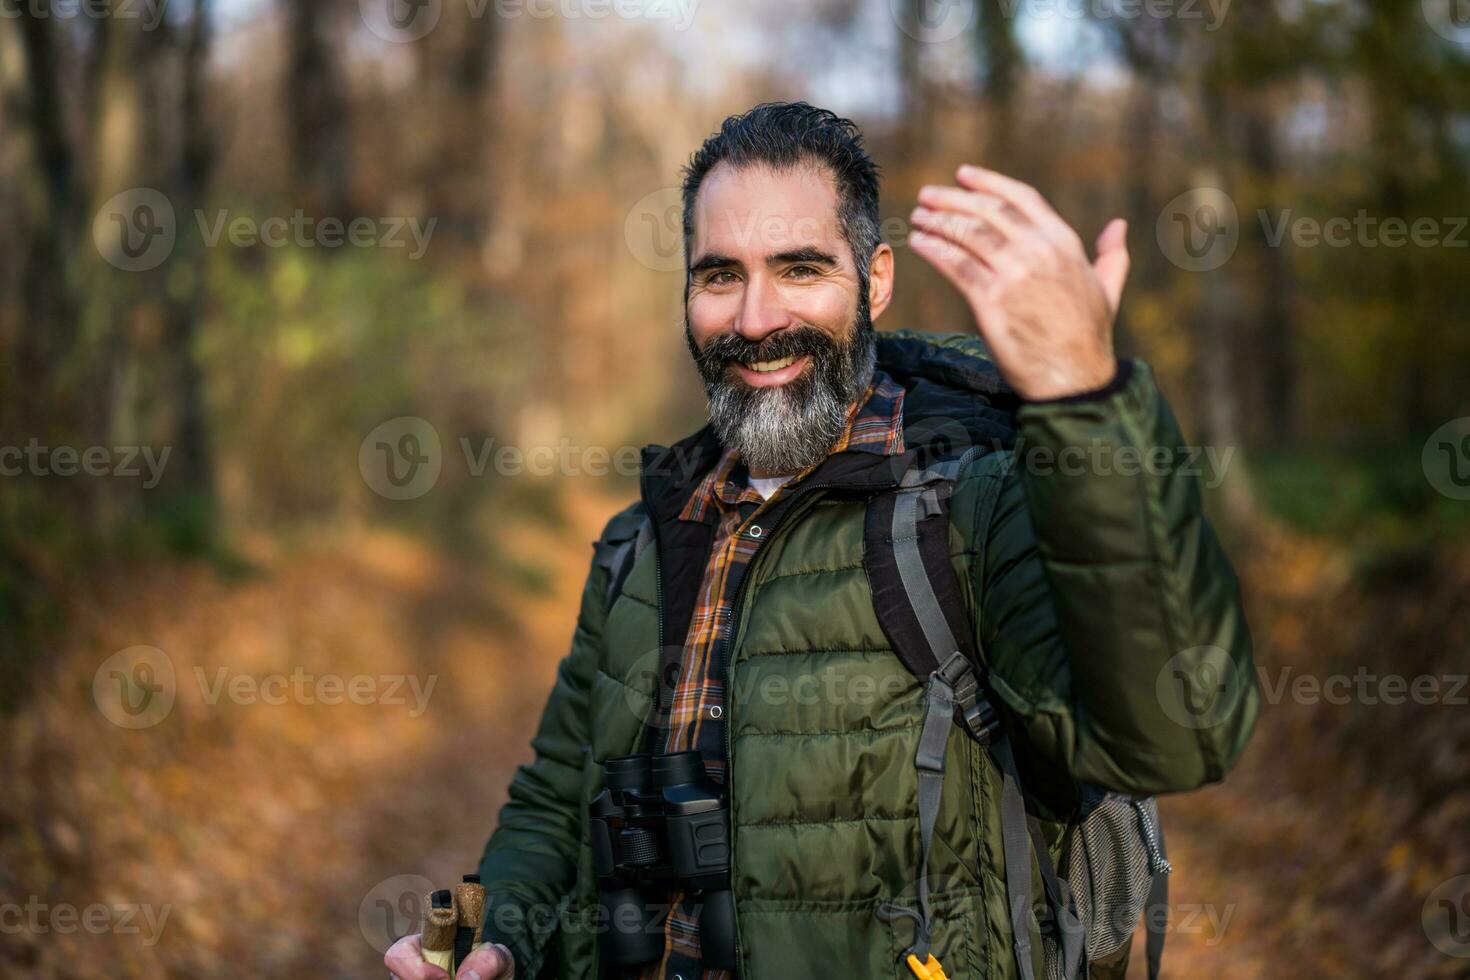 Image of hiker showing invitation gesture while hiking in nature photo